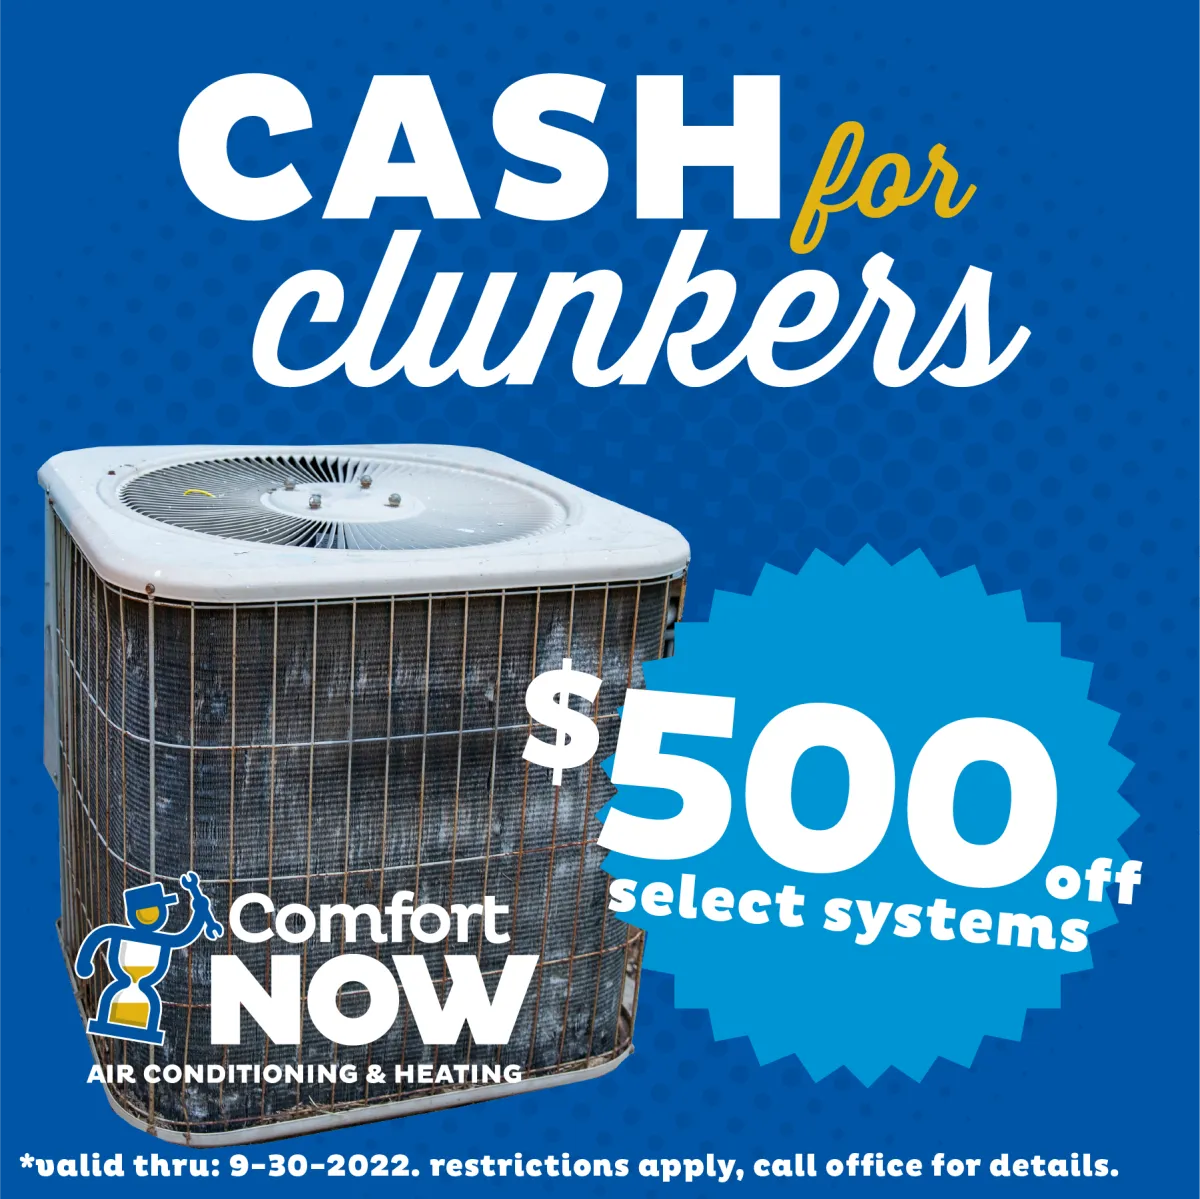 Cash for your Clunker! Up to $500 cash off